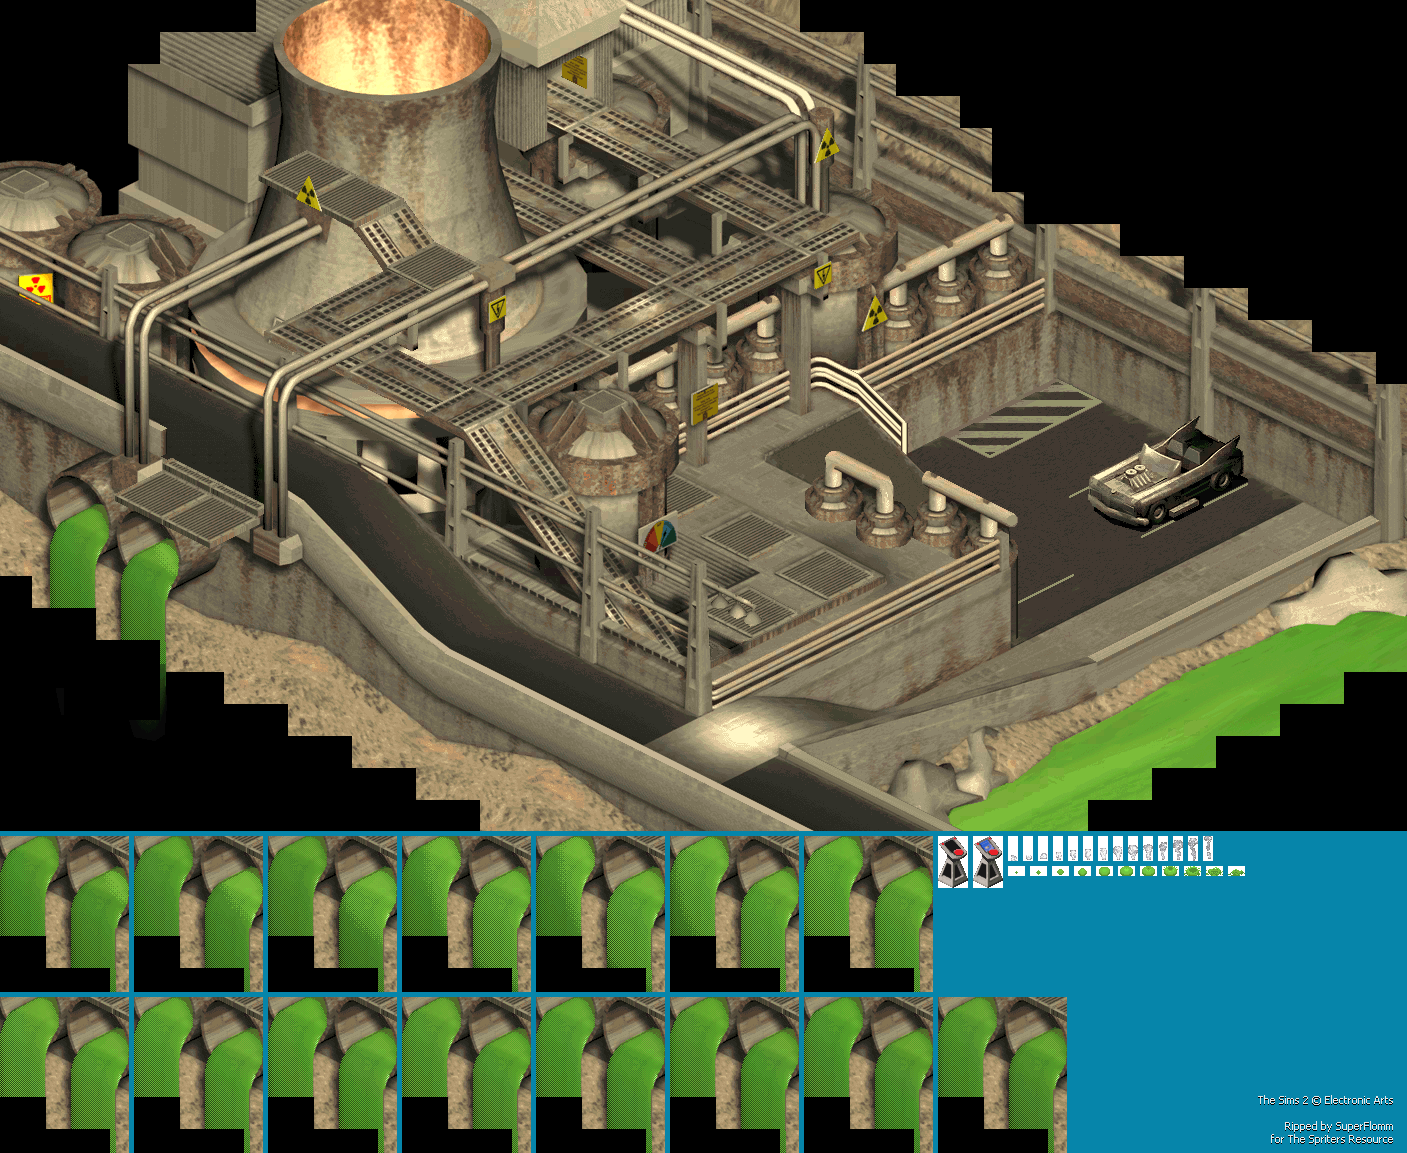 The Sims 2 - Nuclear Plant (Day)